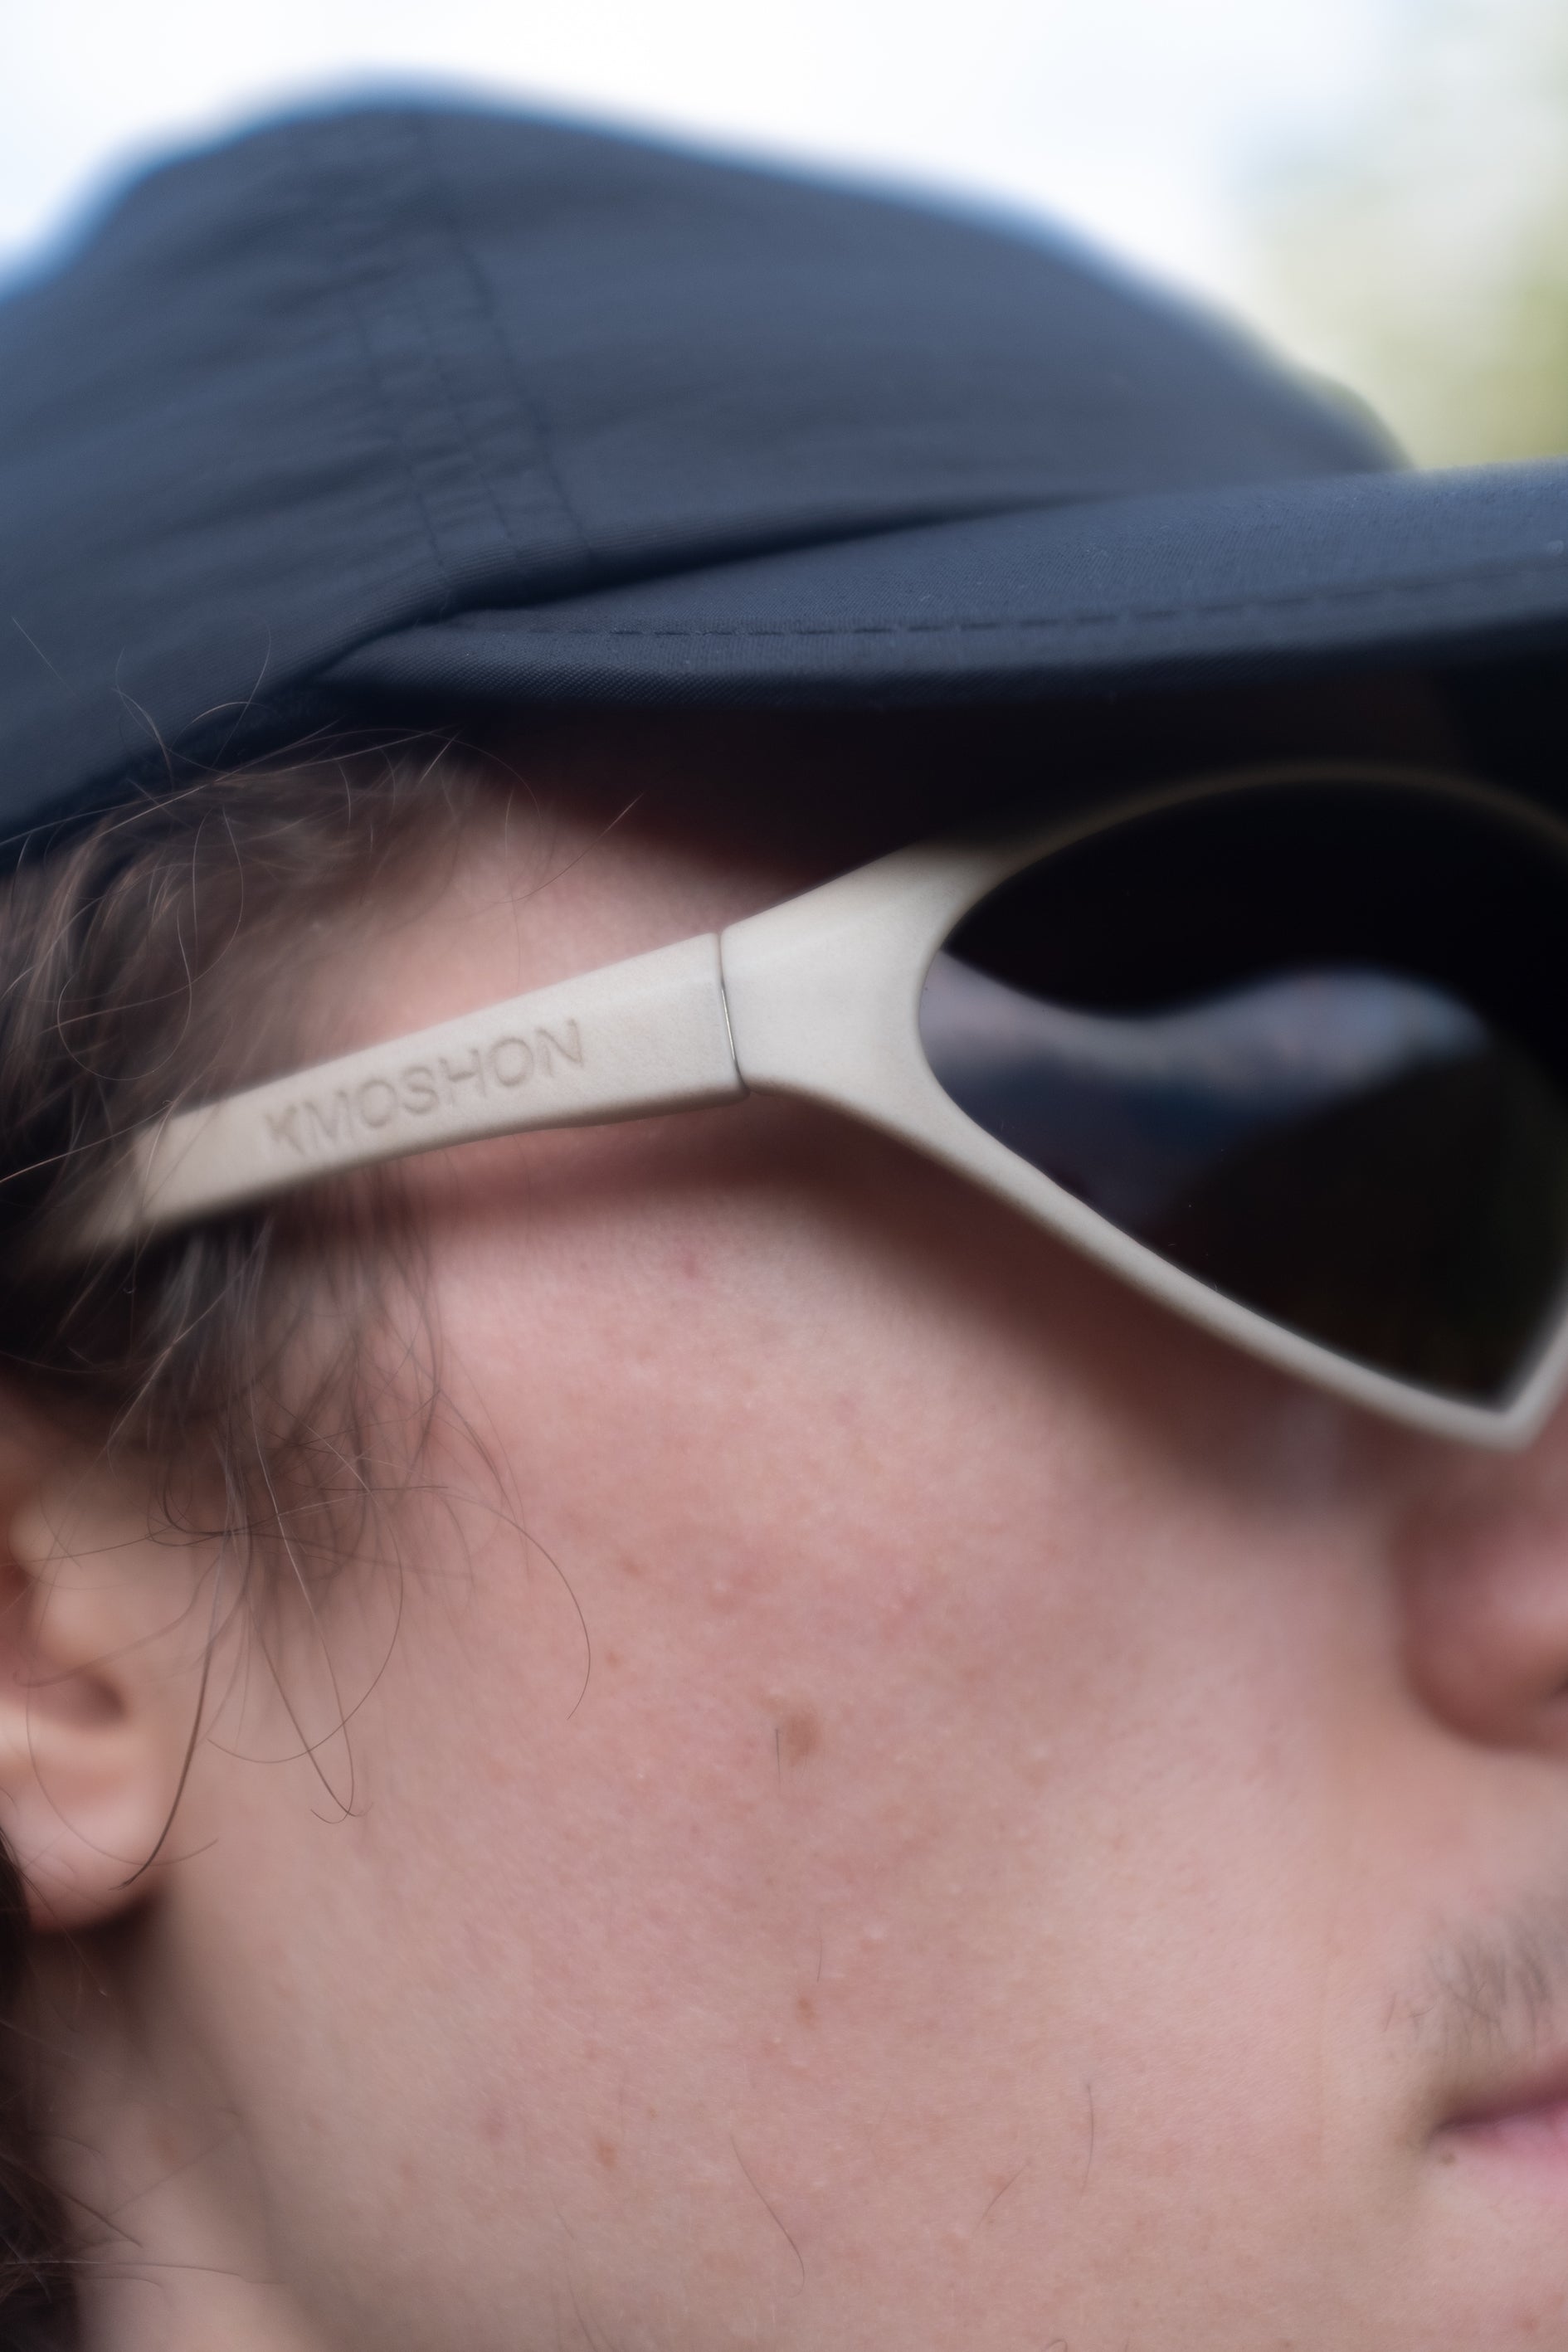 Close up of Kmoshon sunglasses from the side worn by a man in a cap